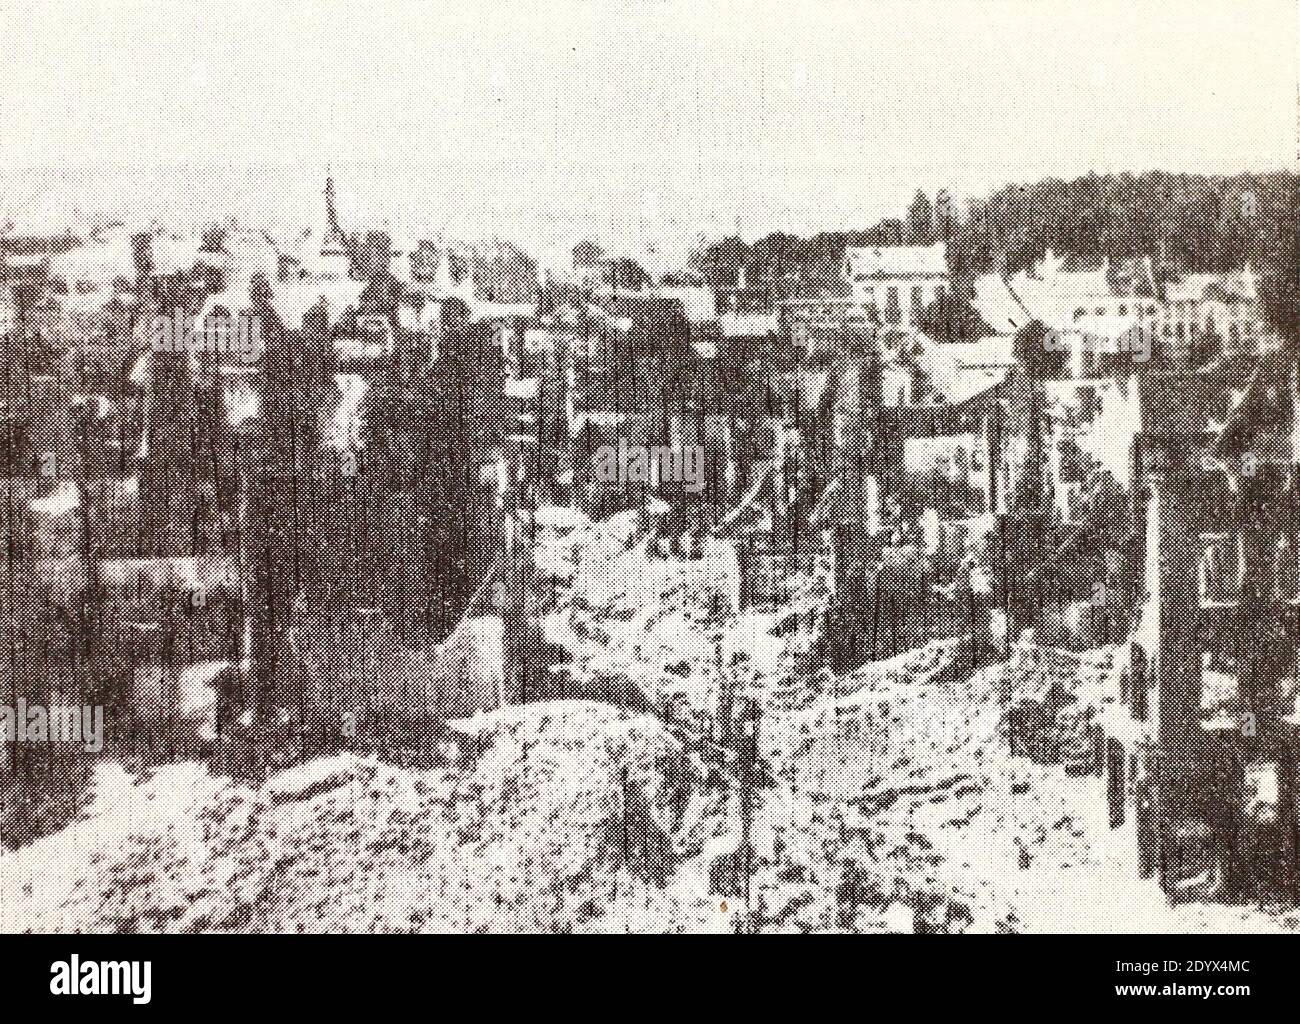 Ruins of Leuven (Louvain) in Belgium destroyed by the Germans in 1914. Stock Photo